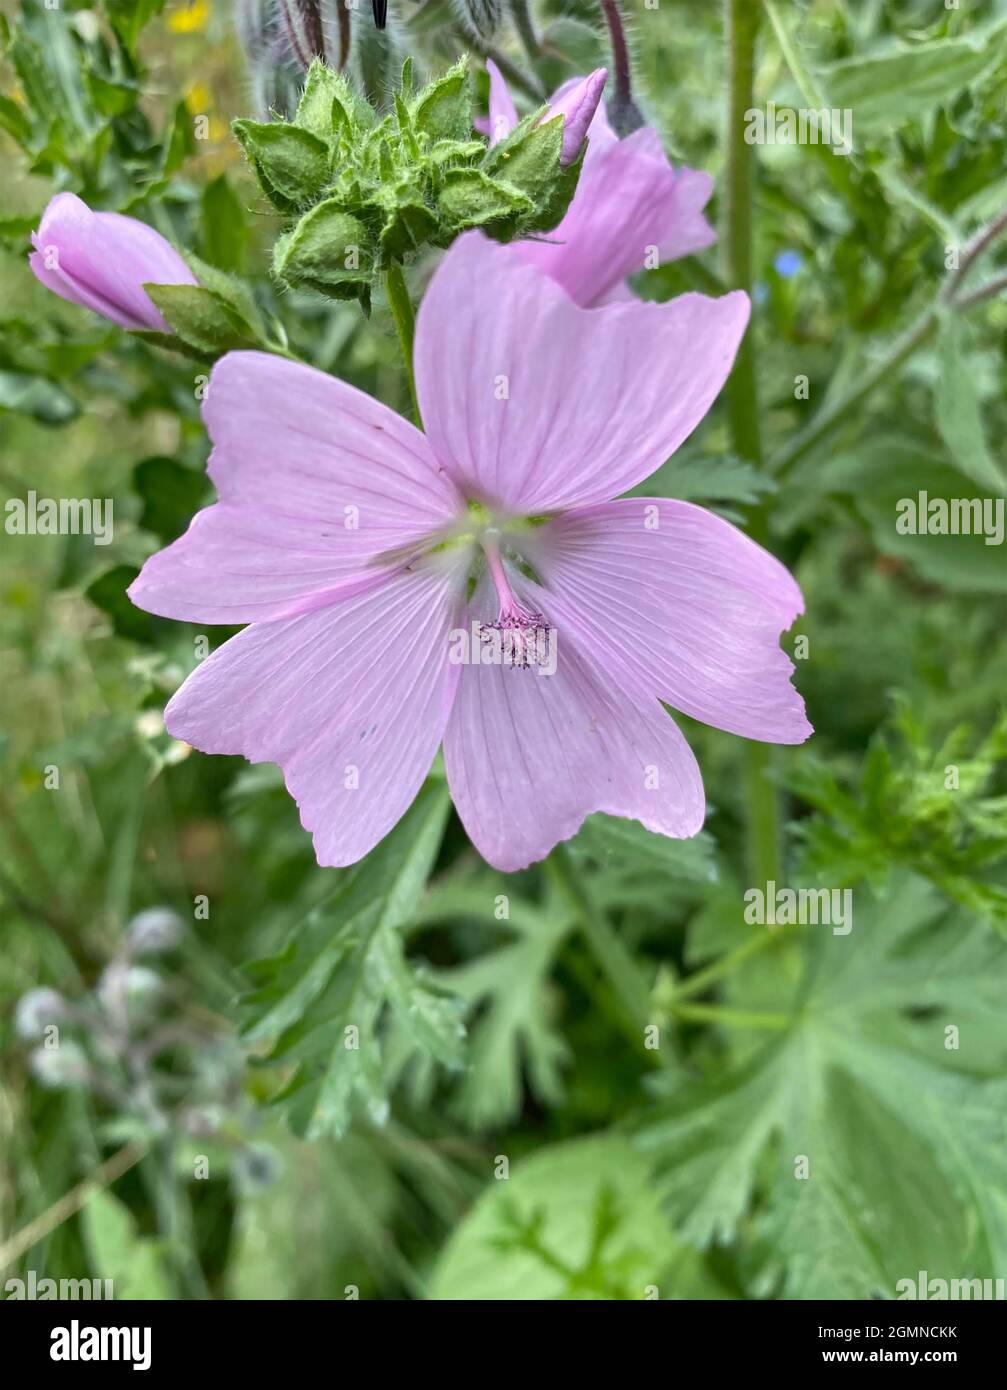 MUSK MALOW Malva moschata. Photo : Tony Gale Banque D'Images